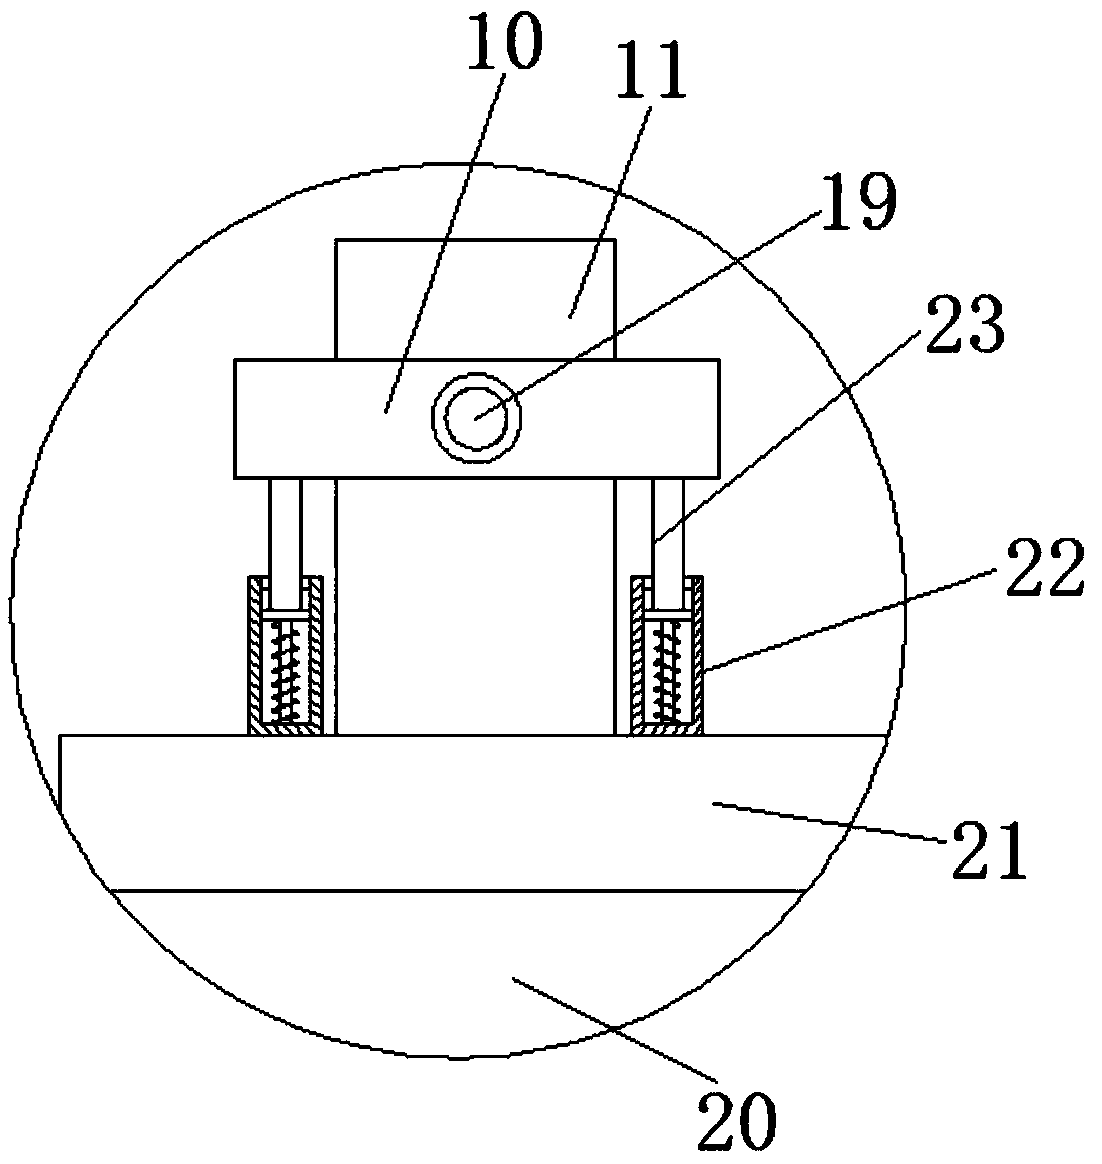 Double-layer multifunction medical-device frame